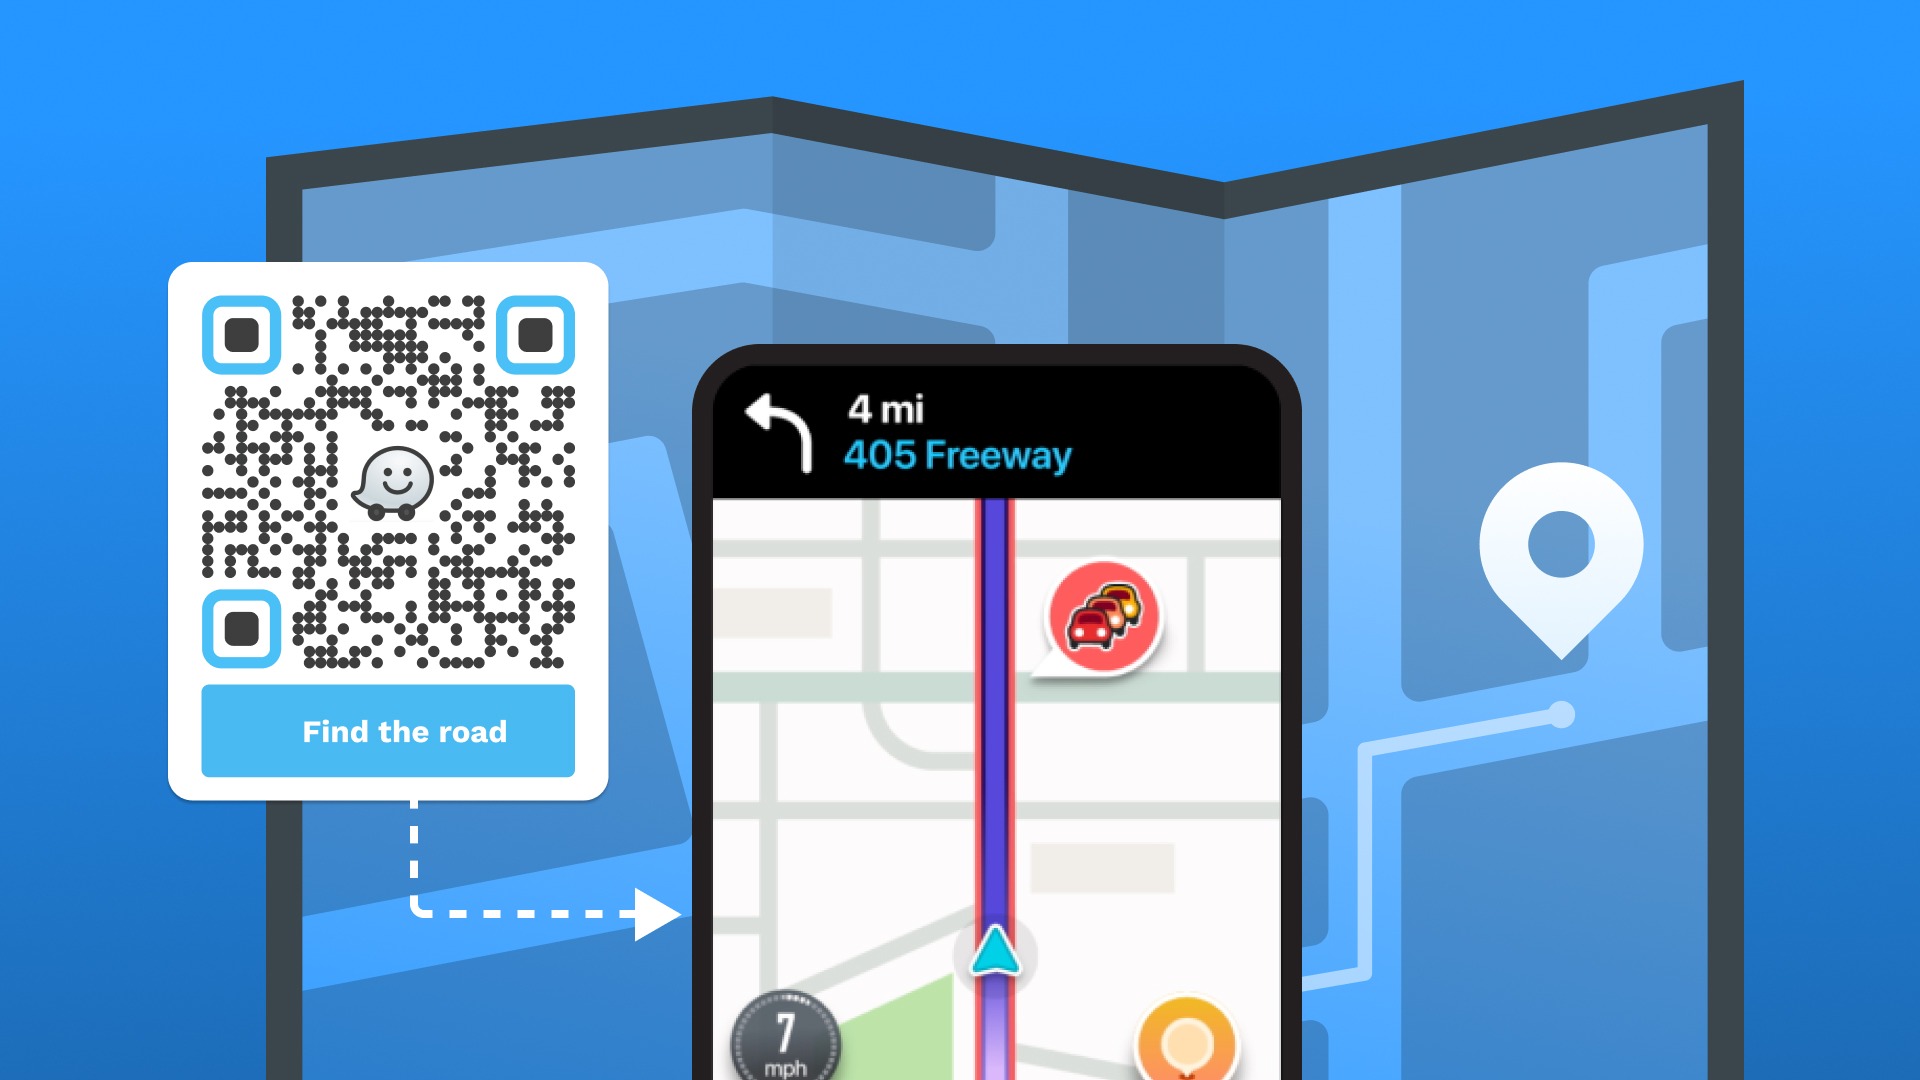 How to Create a QR Code for Waze Location: The Easy Way